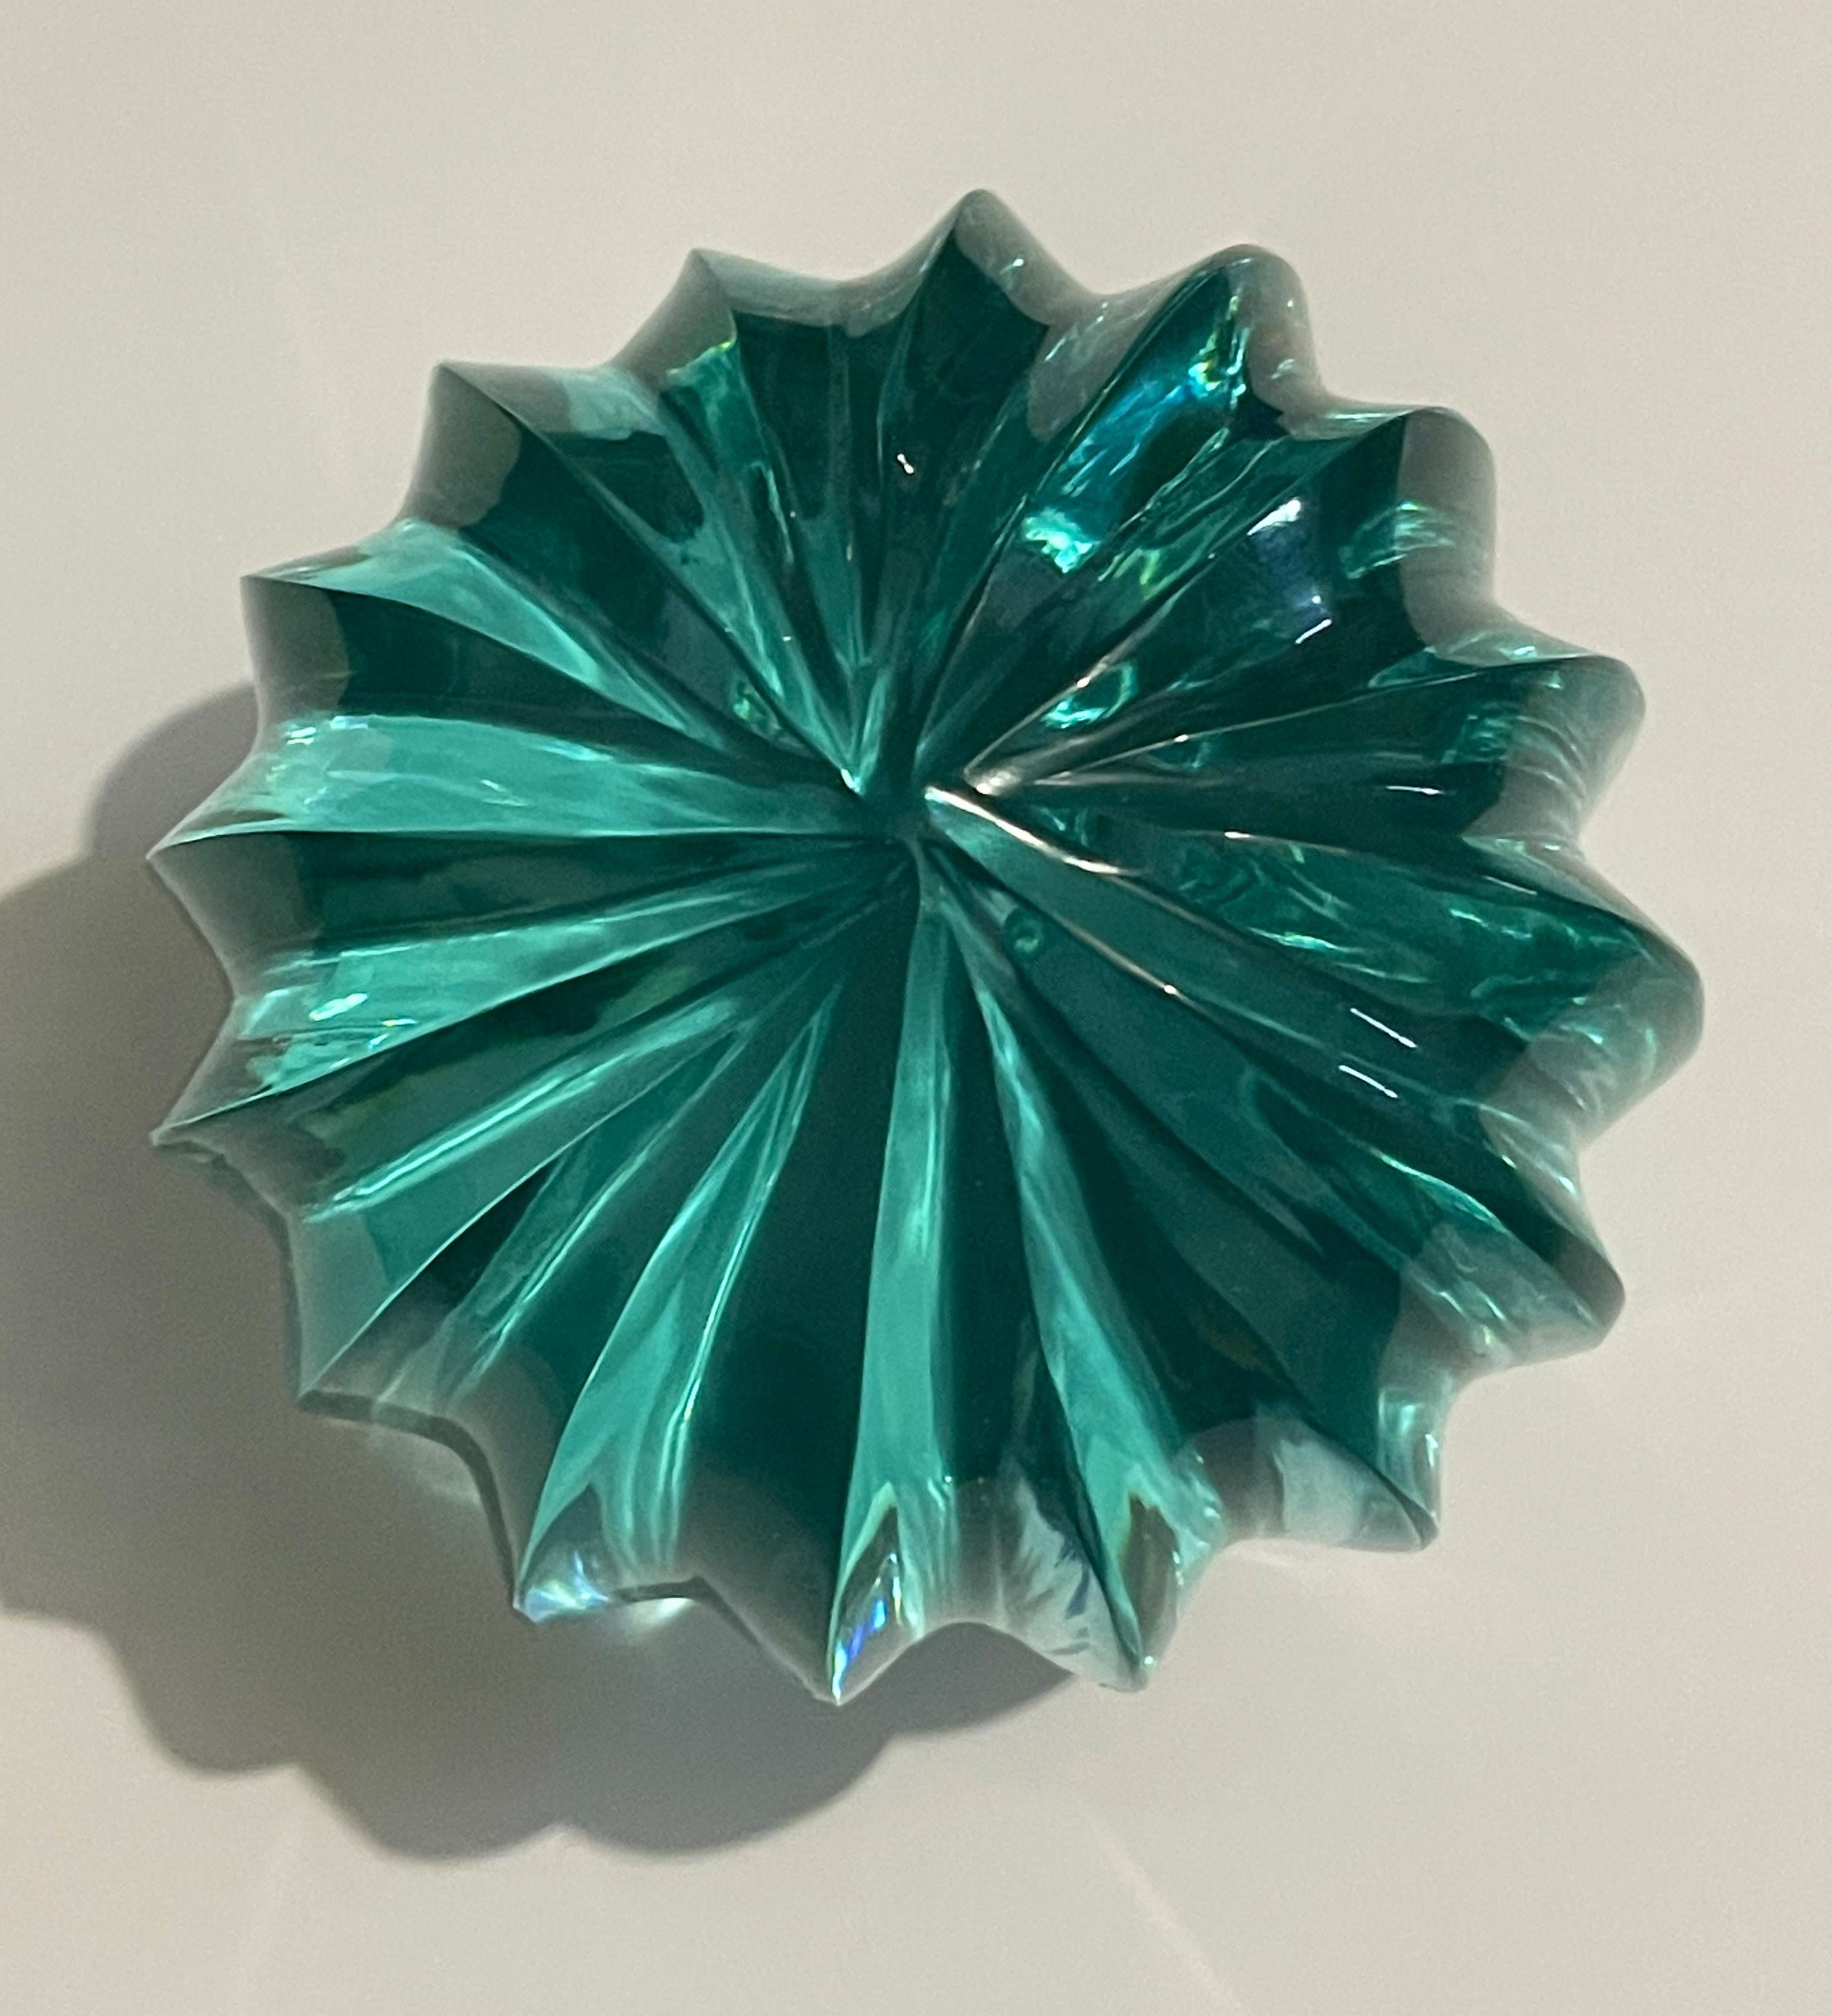 Hand-Carved Contemporary Hand-engraved Aquamarine Sculpture by Ghirò Studio For Sale